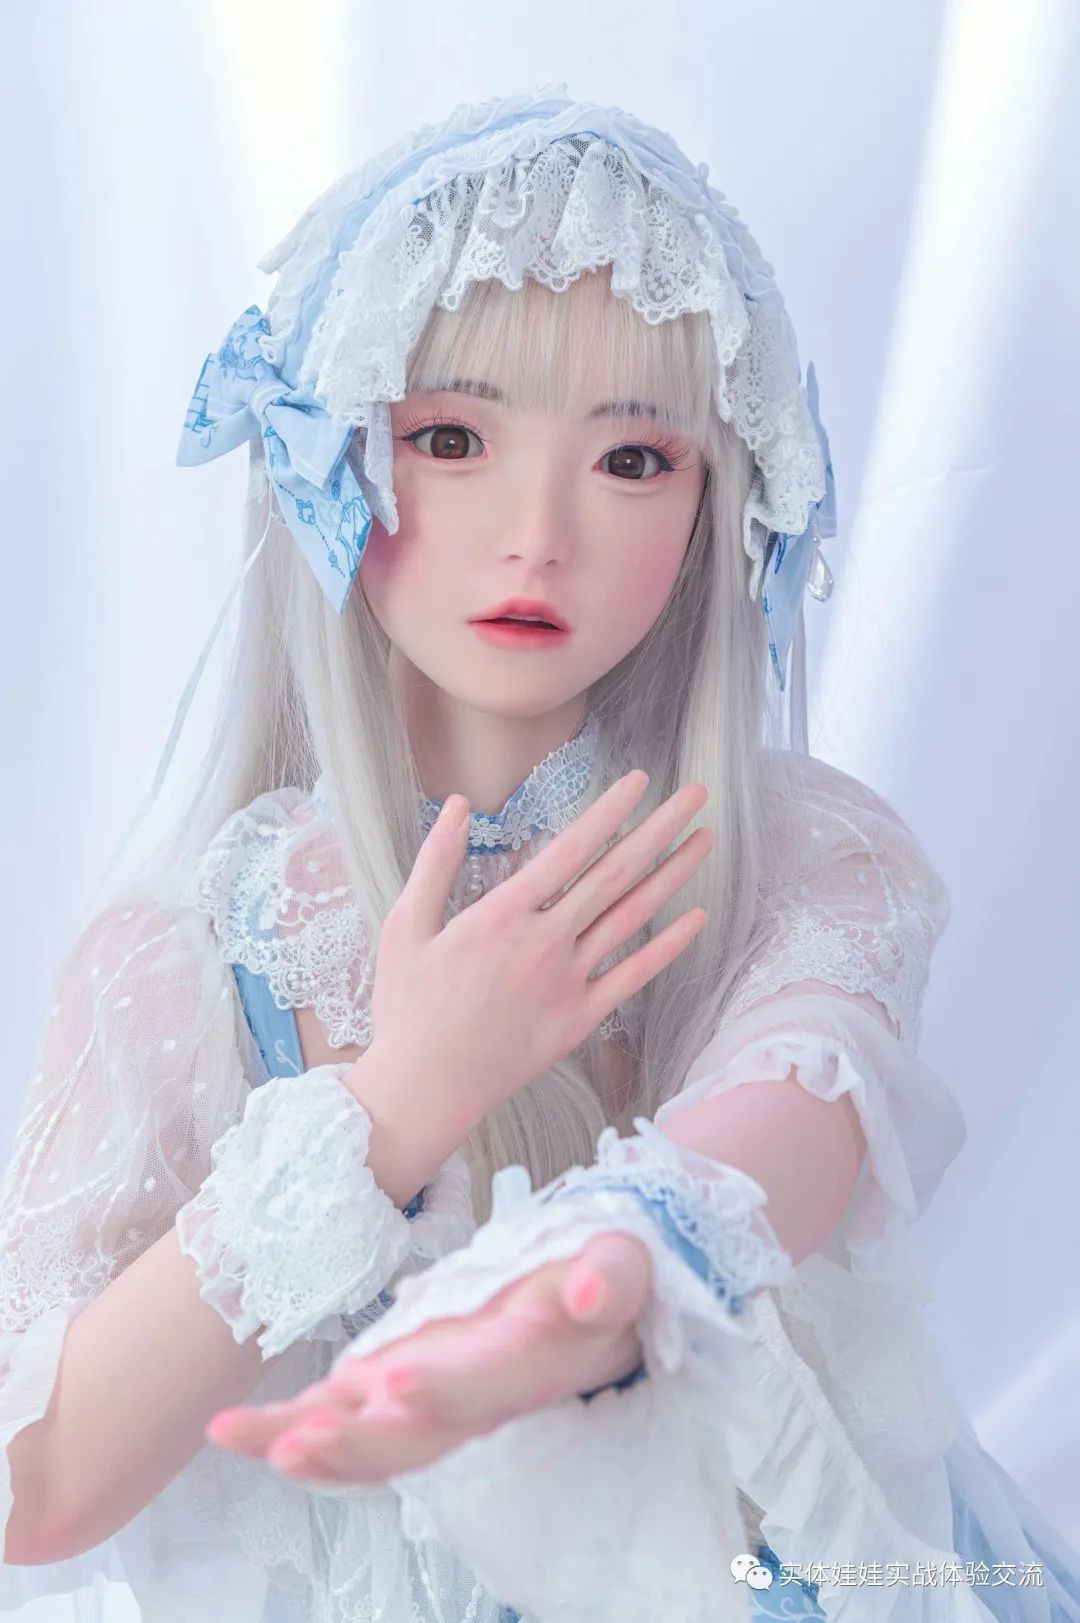 Can physical dolls attract ghosts